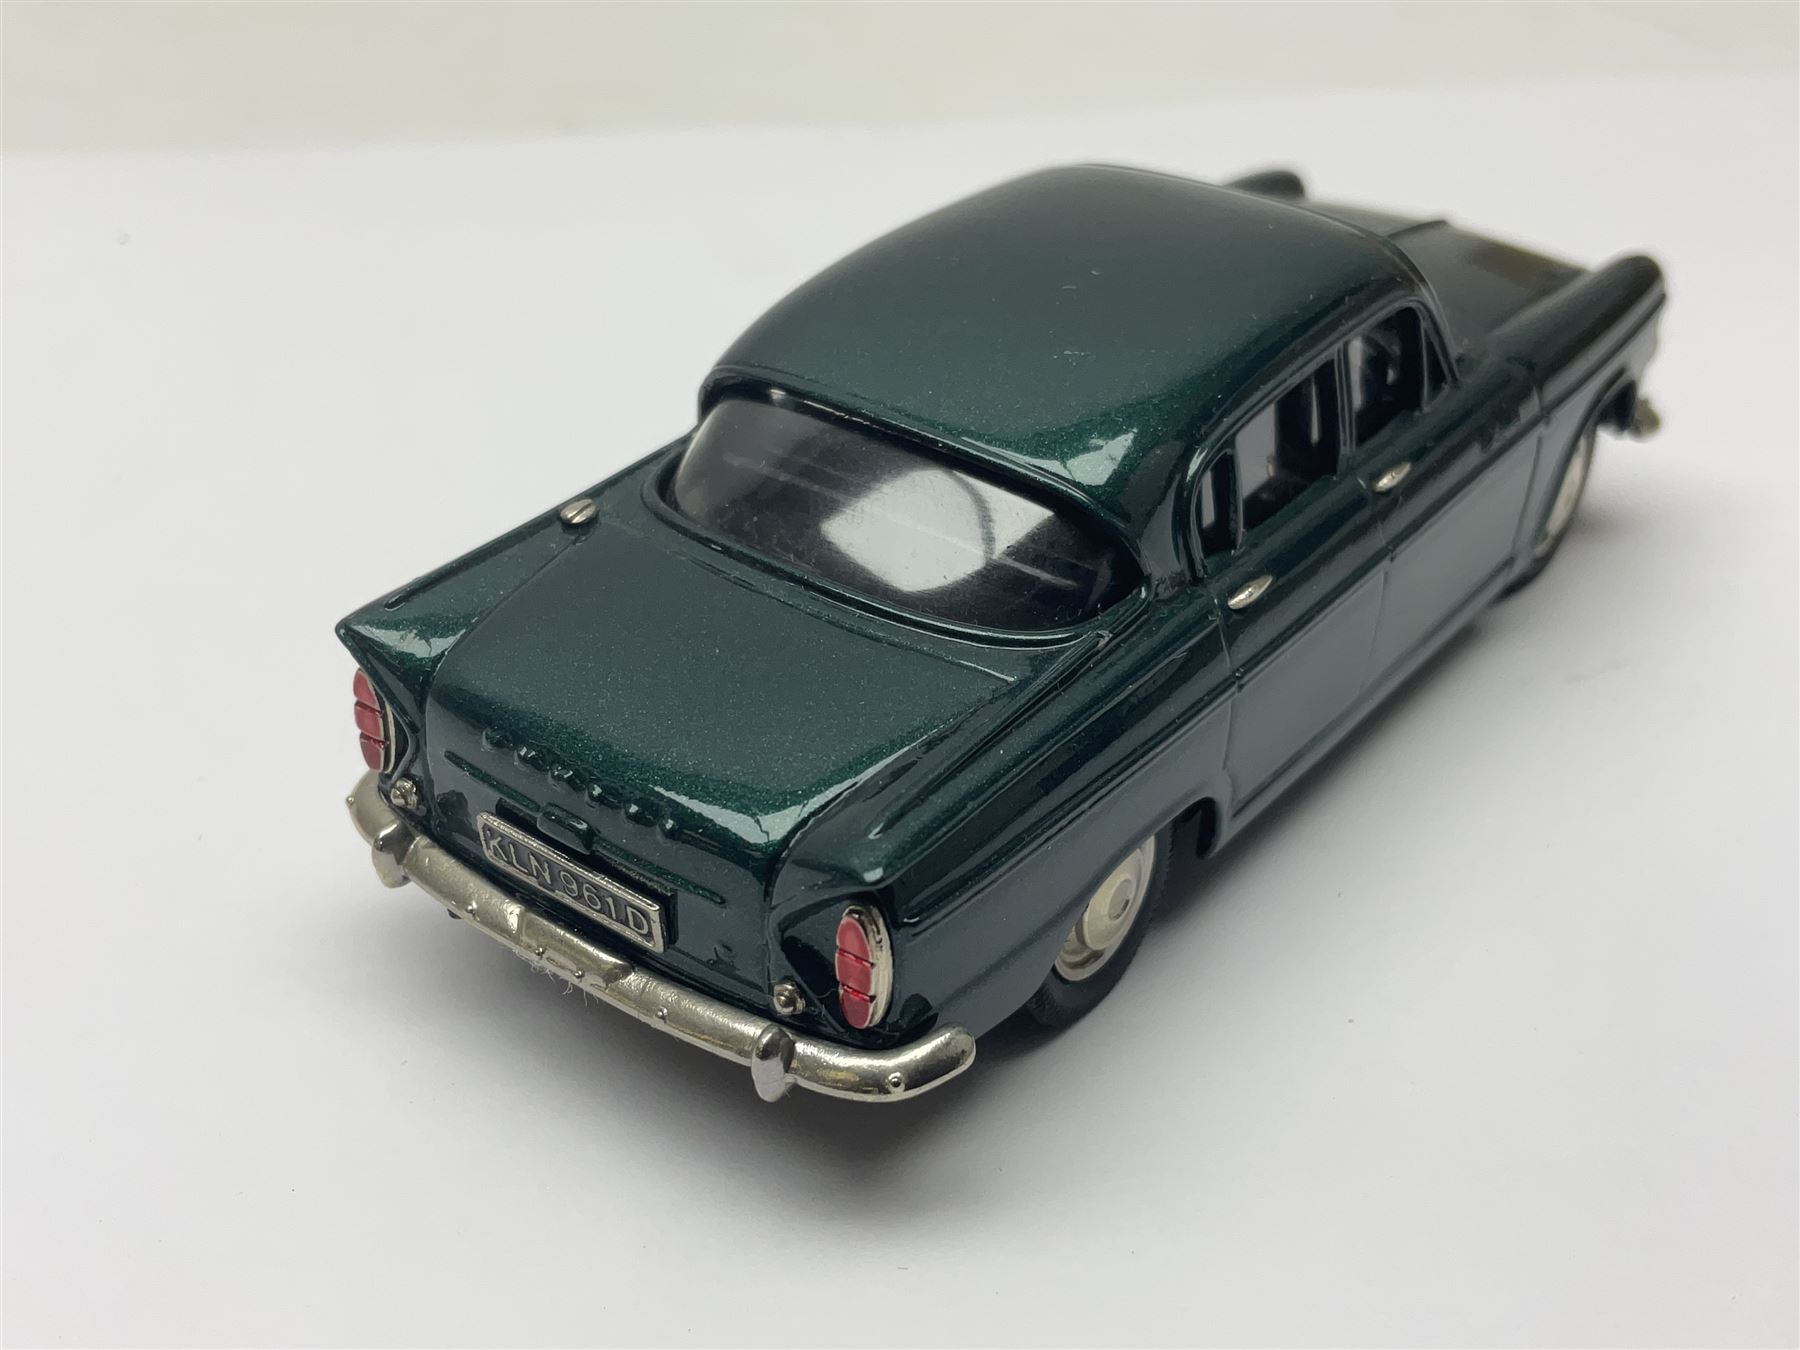 Three Lansdowne Models 1:43 scale models - 1965 Humber Sceptre MkII Four Door Saloon; 1970 Hillman A - Image 6 of 10